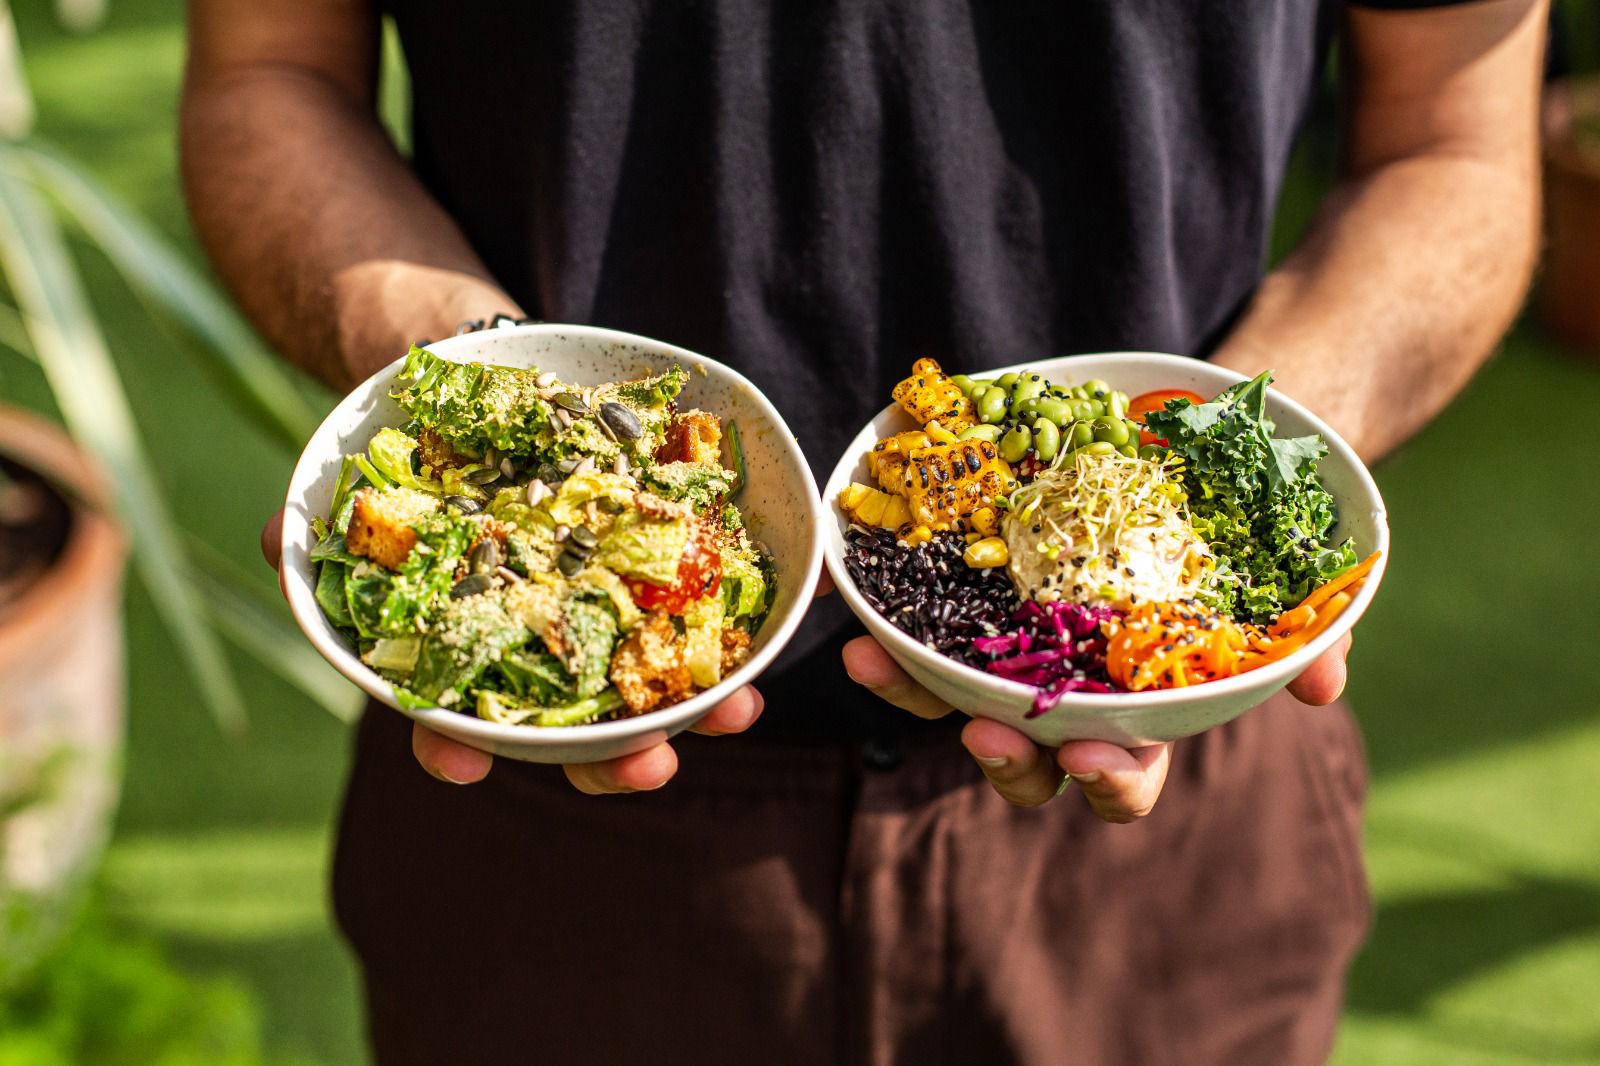 A man shows the fresh, healthy contents of two Bondi Bowls